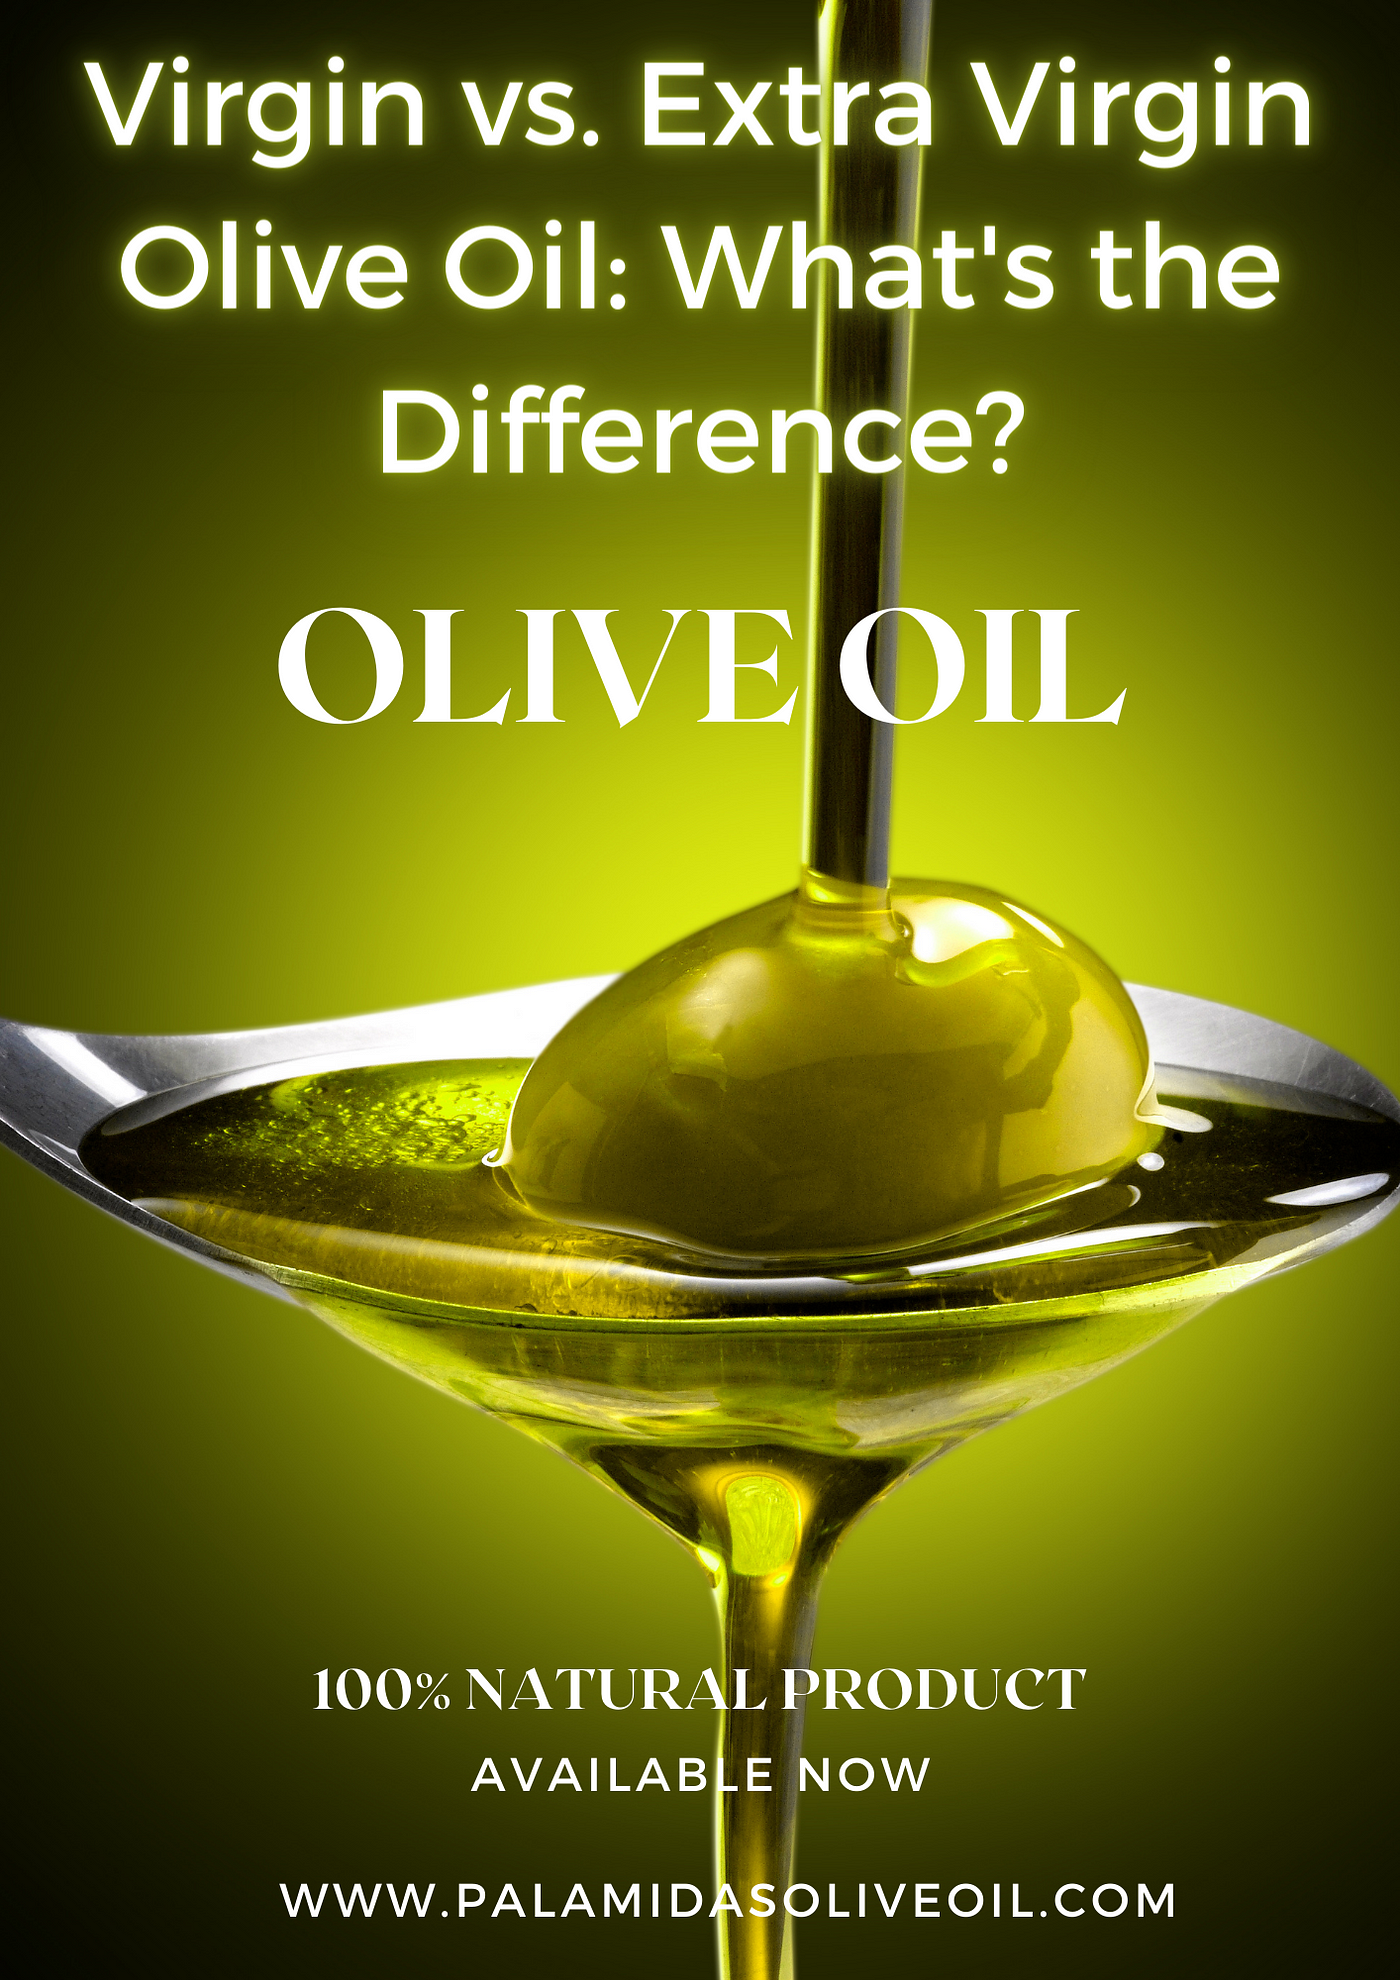 Regular vs. Extra Virgin Olive Oil: What's the Difference?